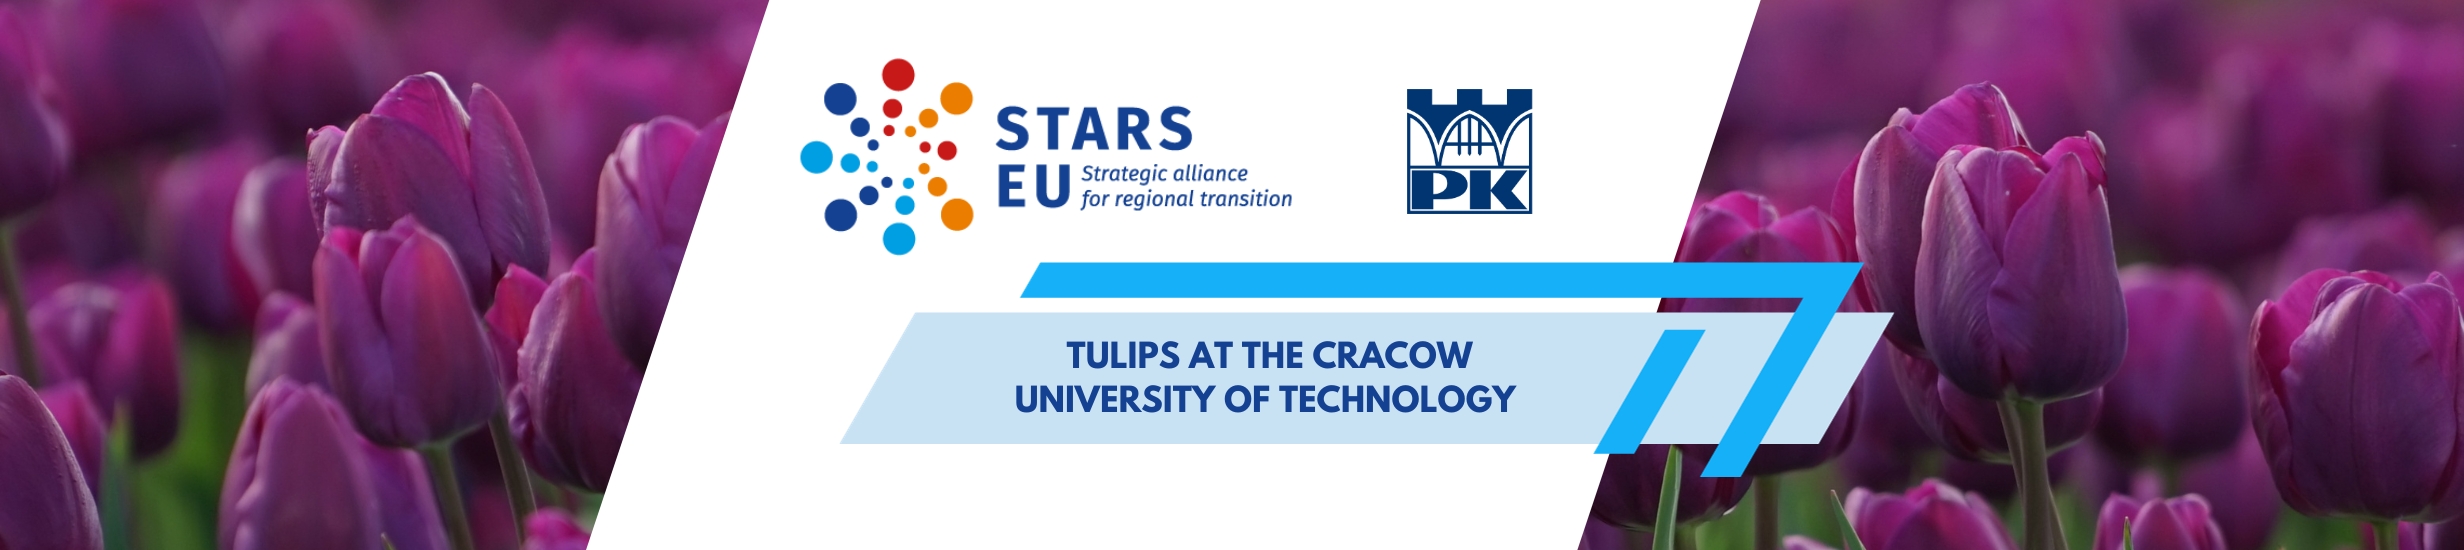 Dutch tulips at the Cracow University of Technology as a symbol of cooperation within STARS EU  